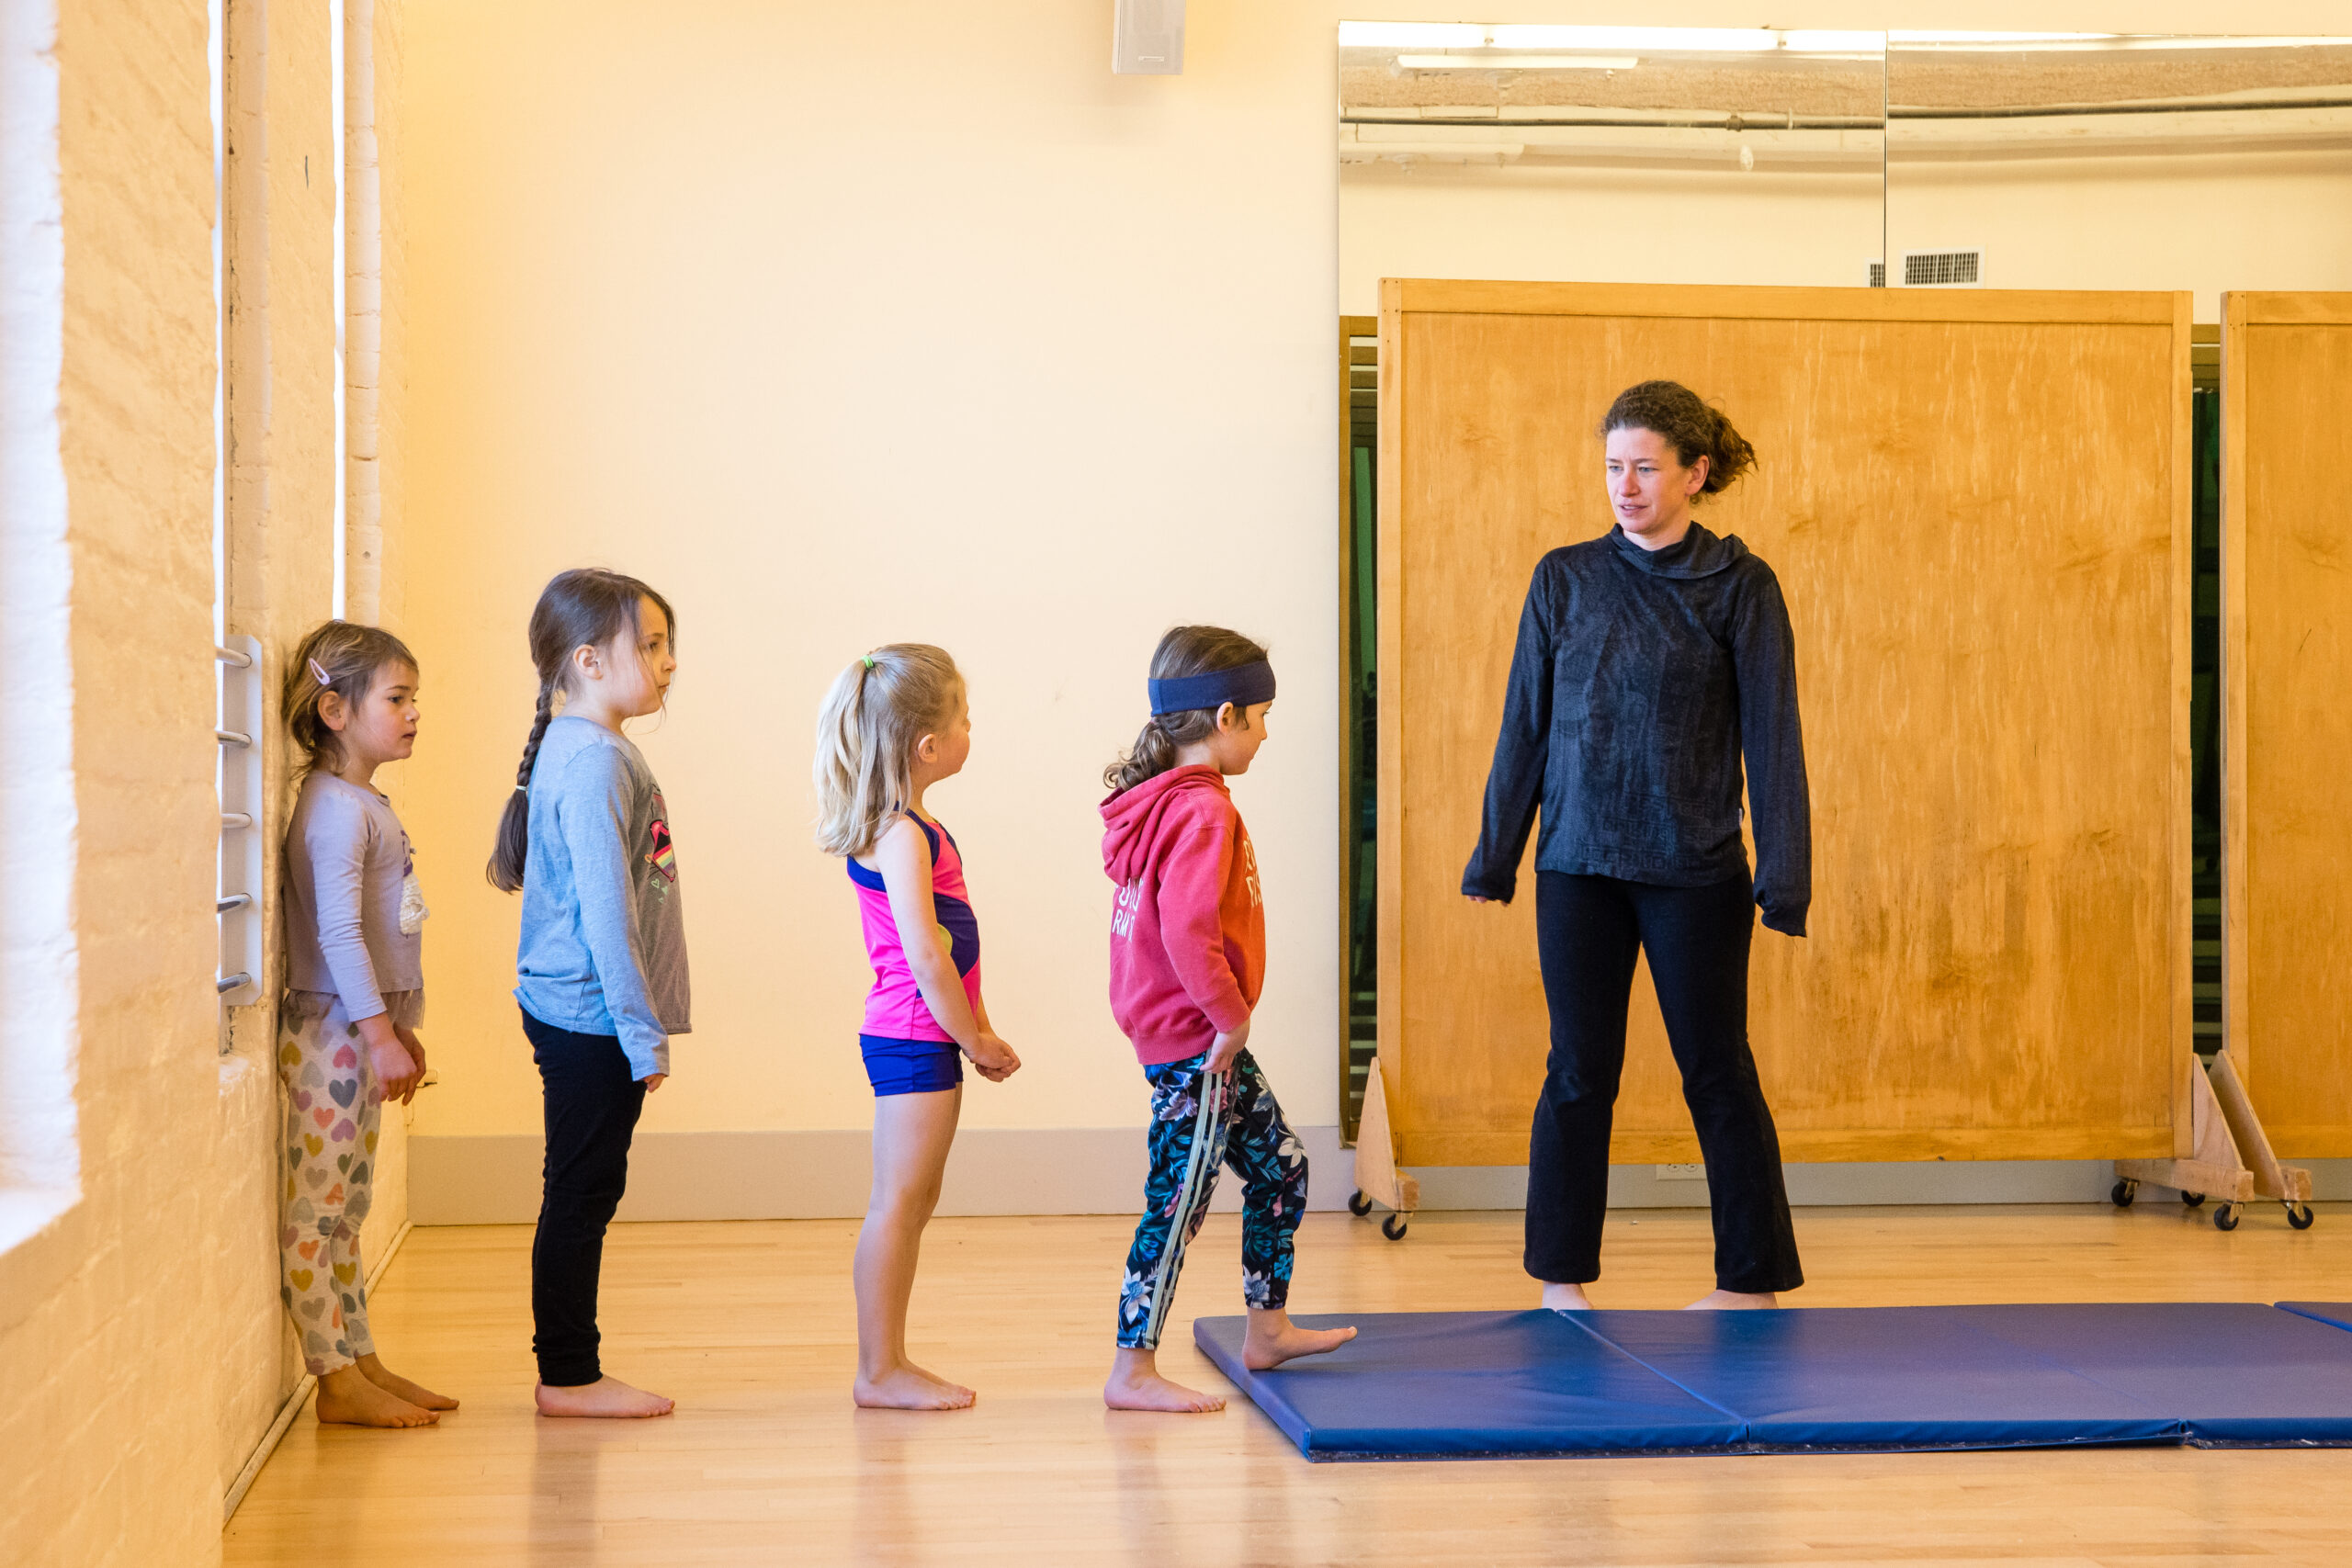 A teacher with young children in a dance studio with a tumbling mat